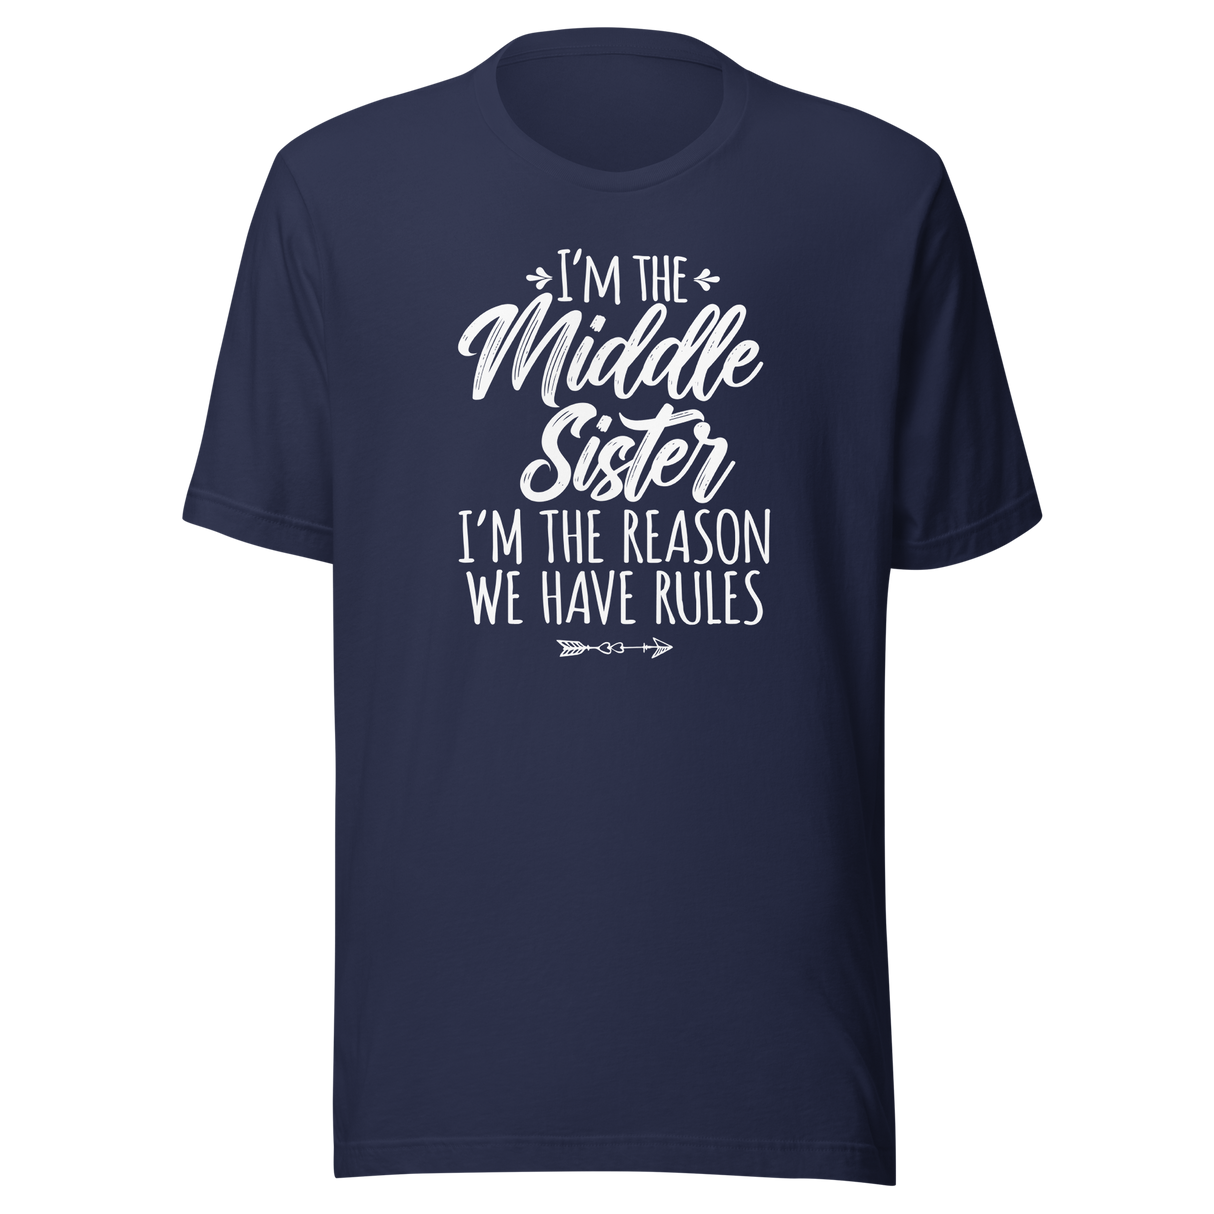 I'm The Middle Sister I'm The Reason We Have Rules - Life Tee - Family T-Shirt - Middle Tee - Sister, T-Shirt - Rules, Tee